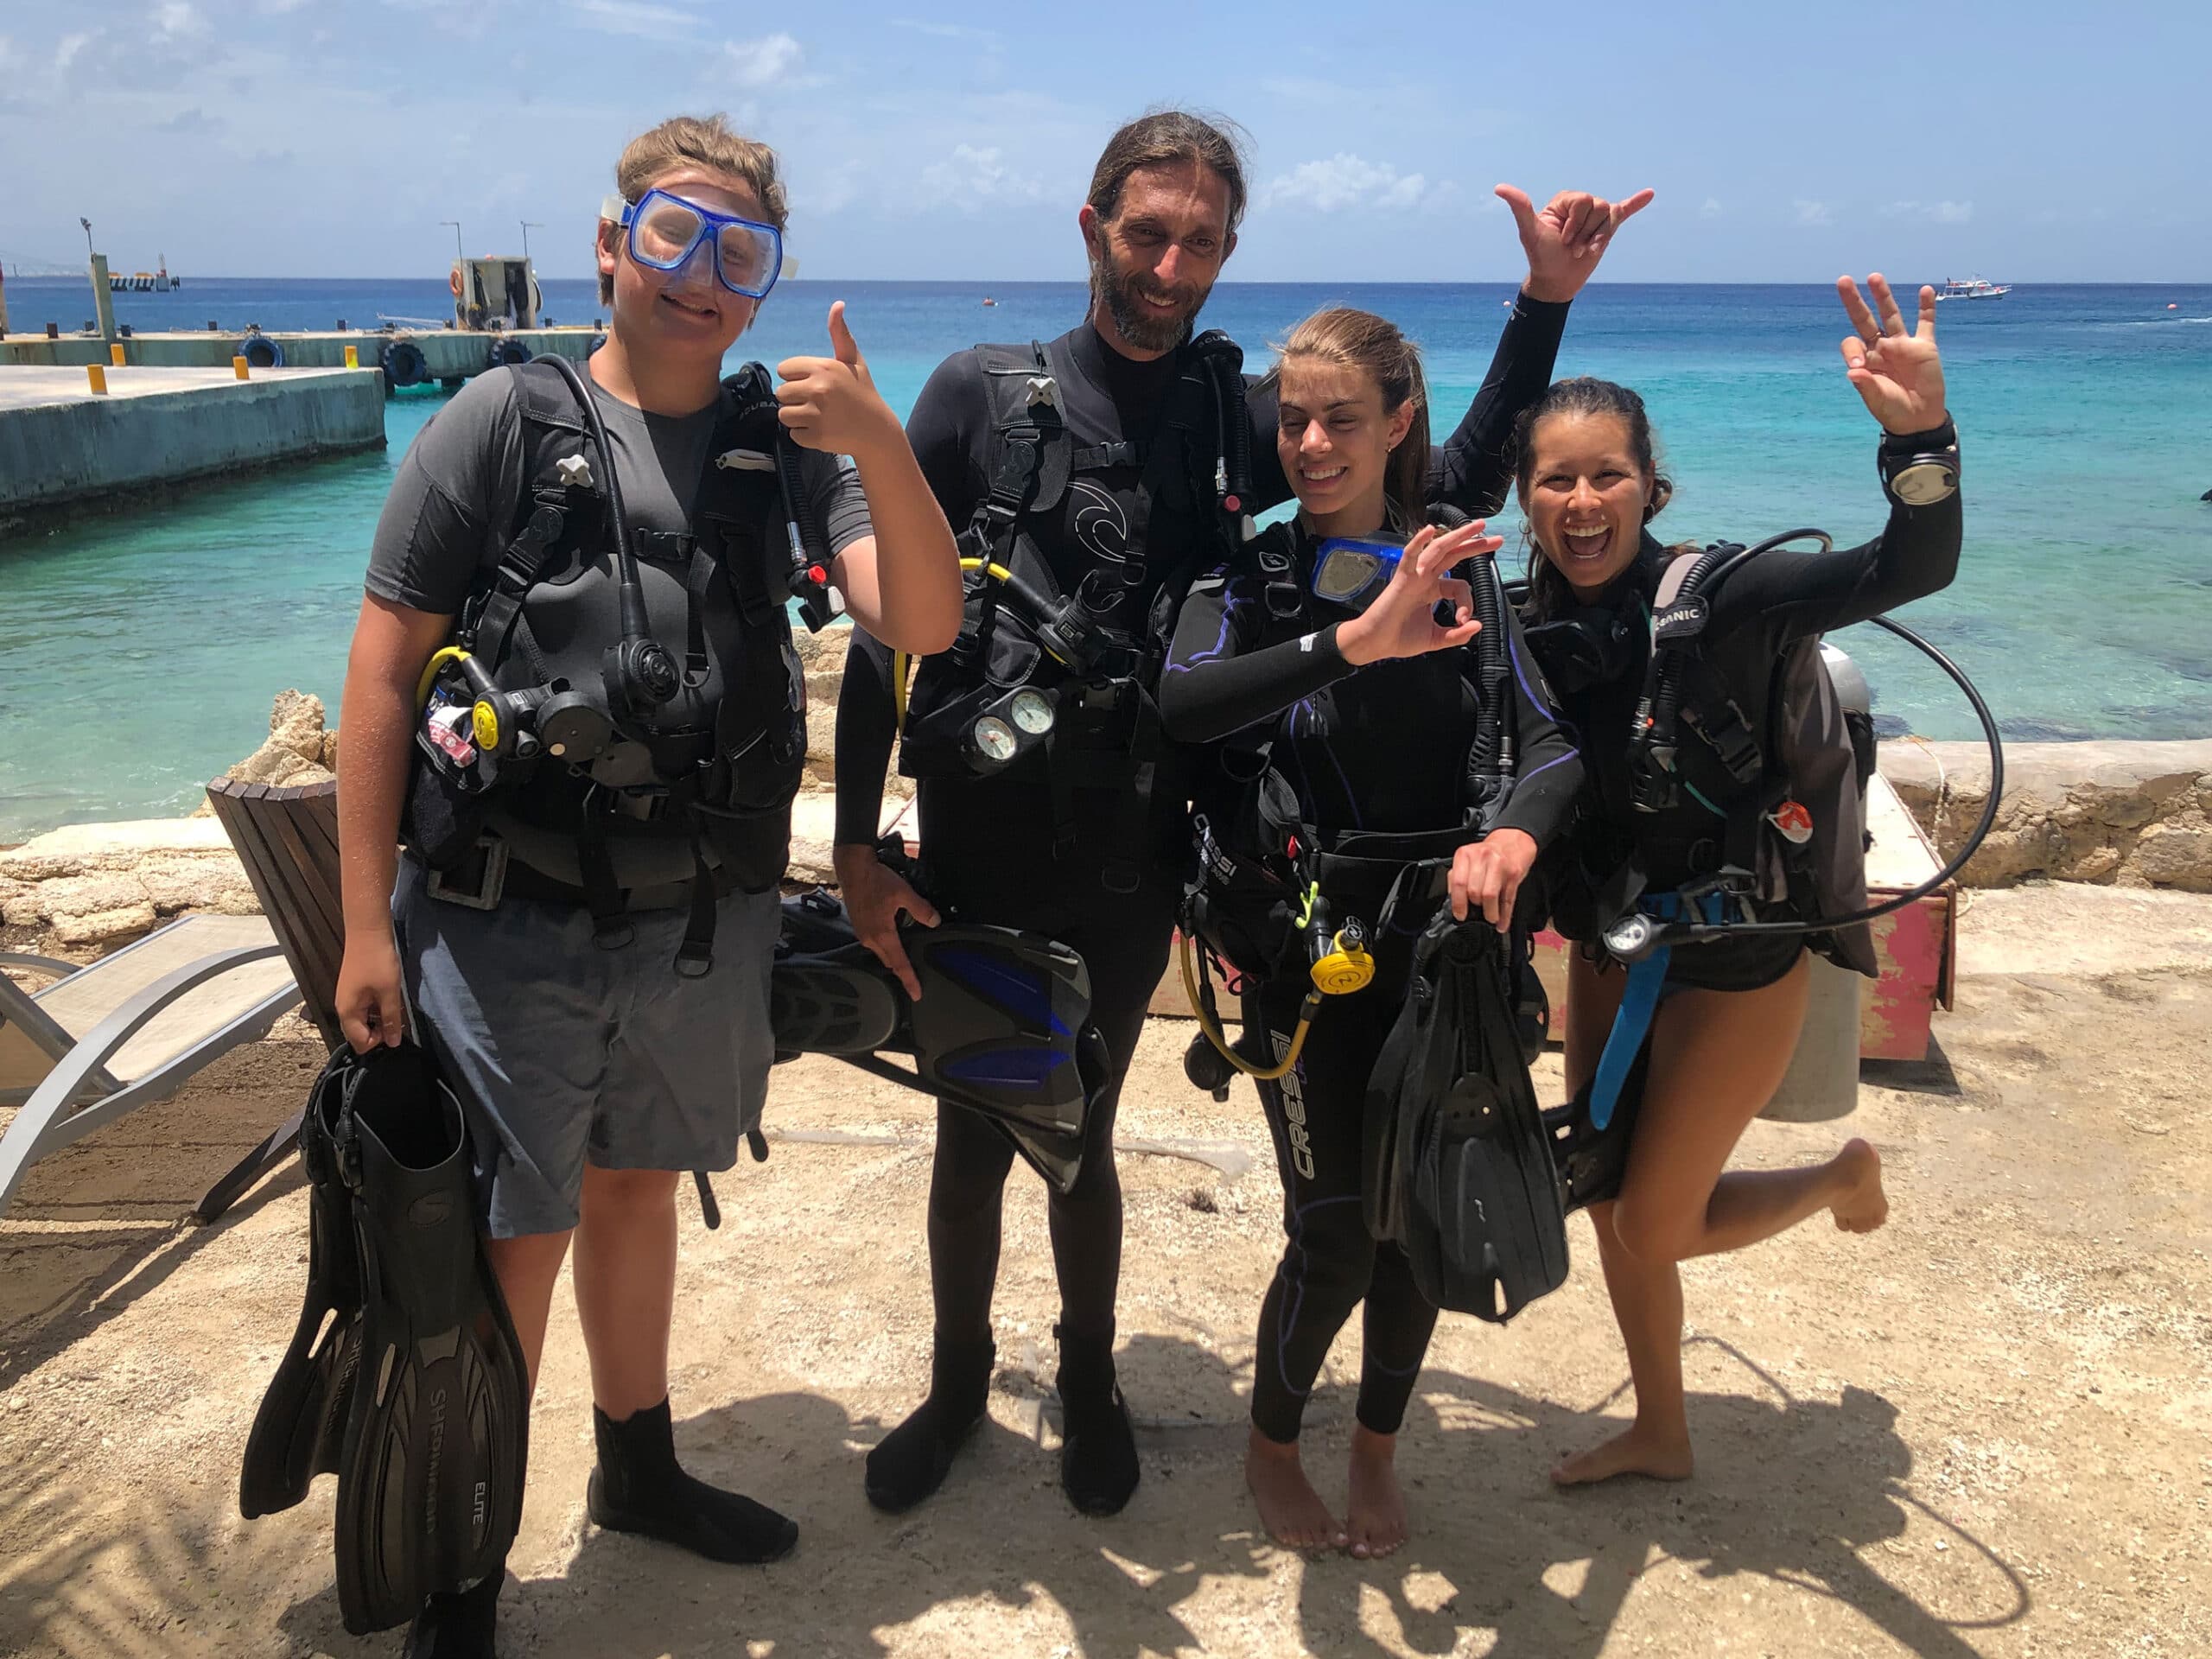 3 Intro Divers & Instructor standing on the beach after a day of diving.